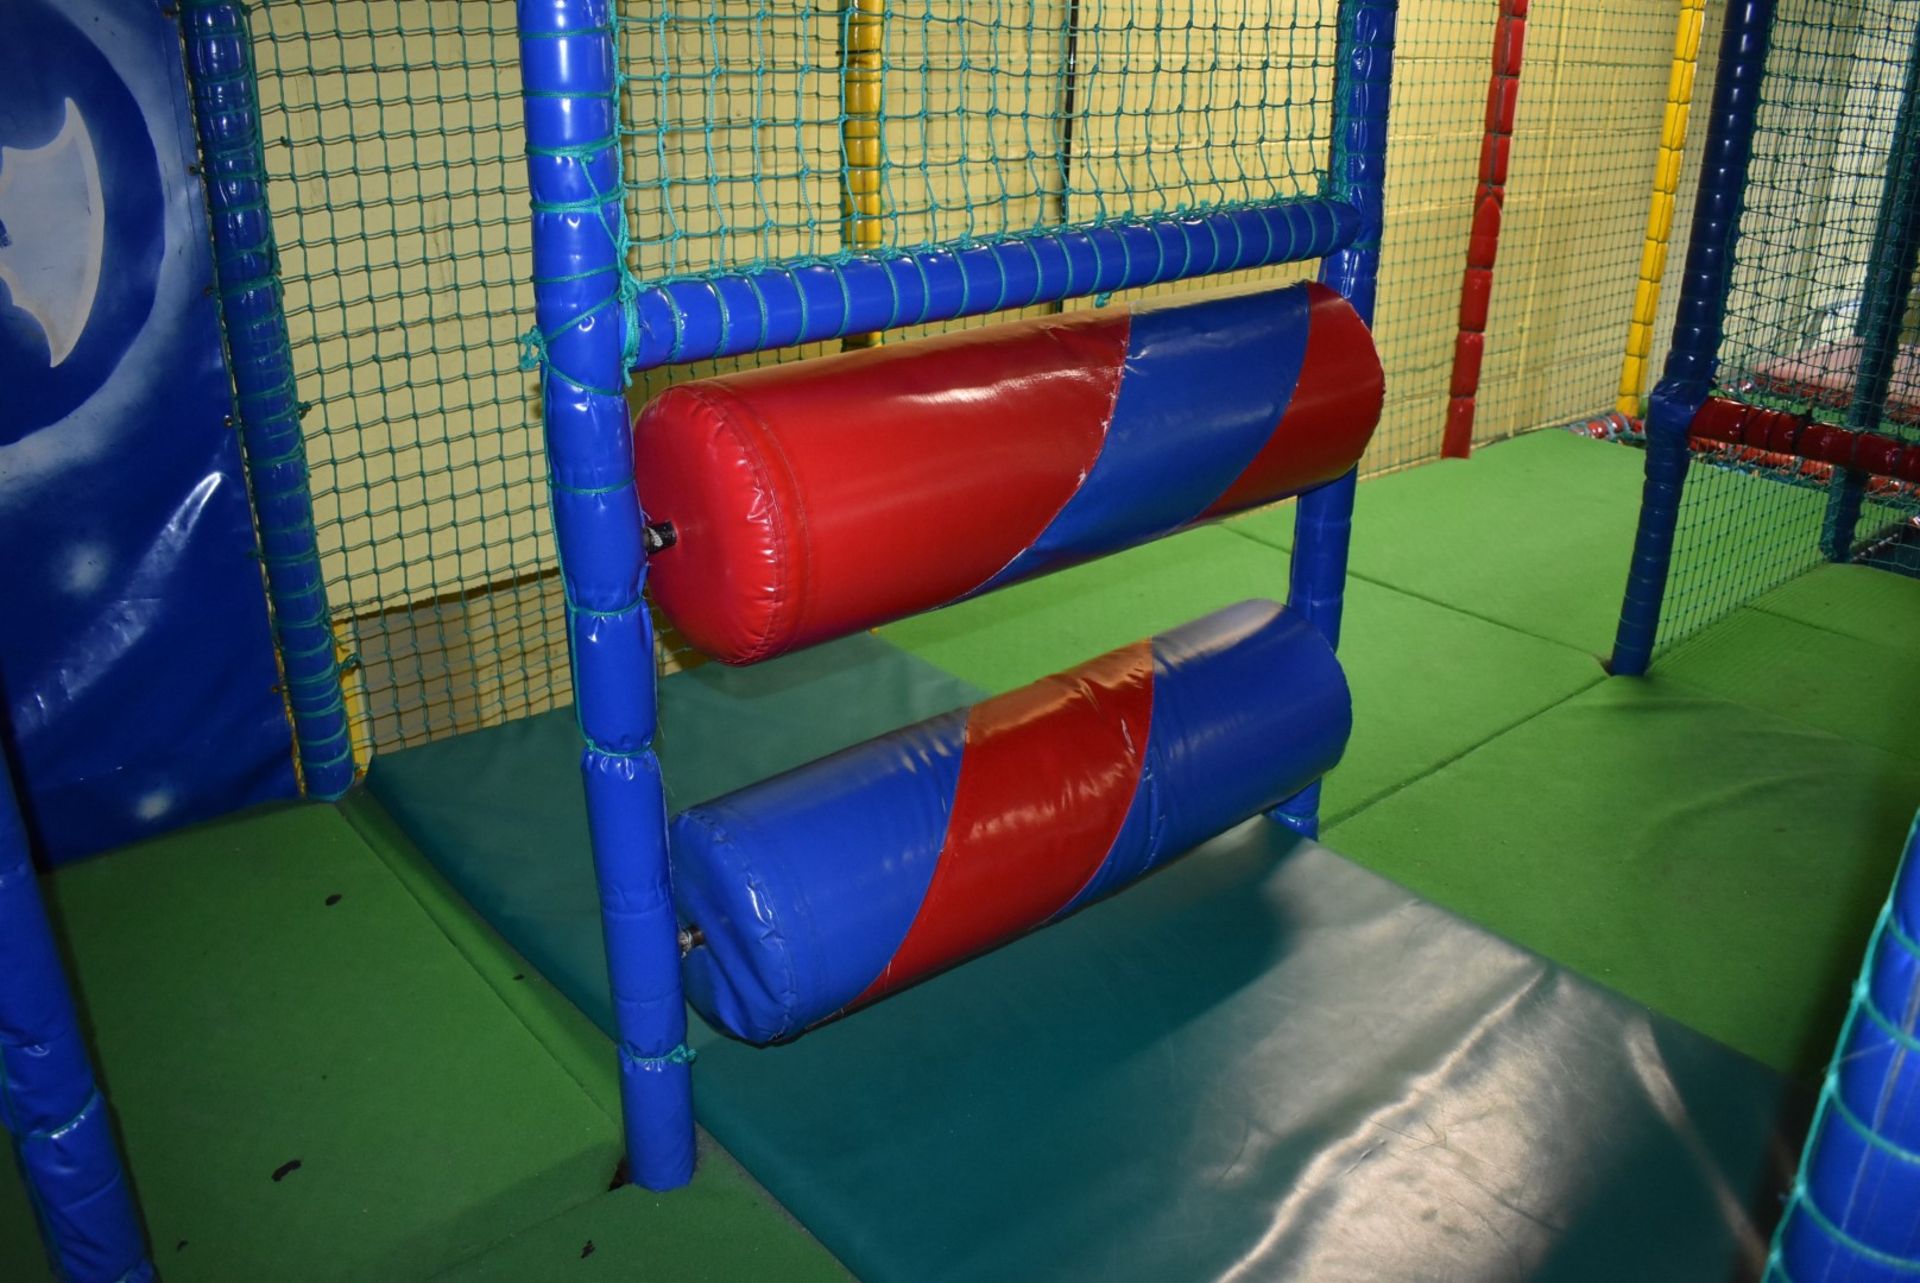 Bramleys Big Adventure Playground - Giant Action-Packed Playcentre With Slides, Zip Line Swings, - Image 49 of 128